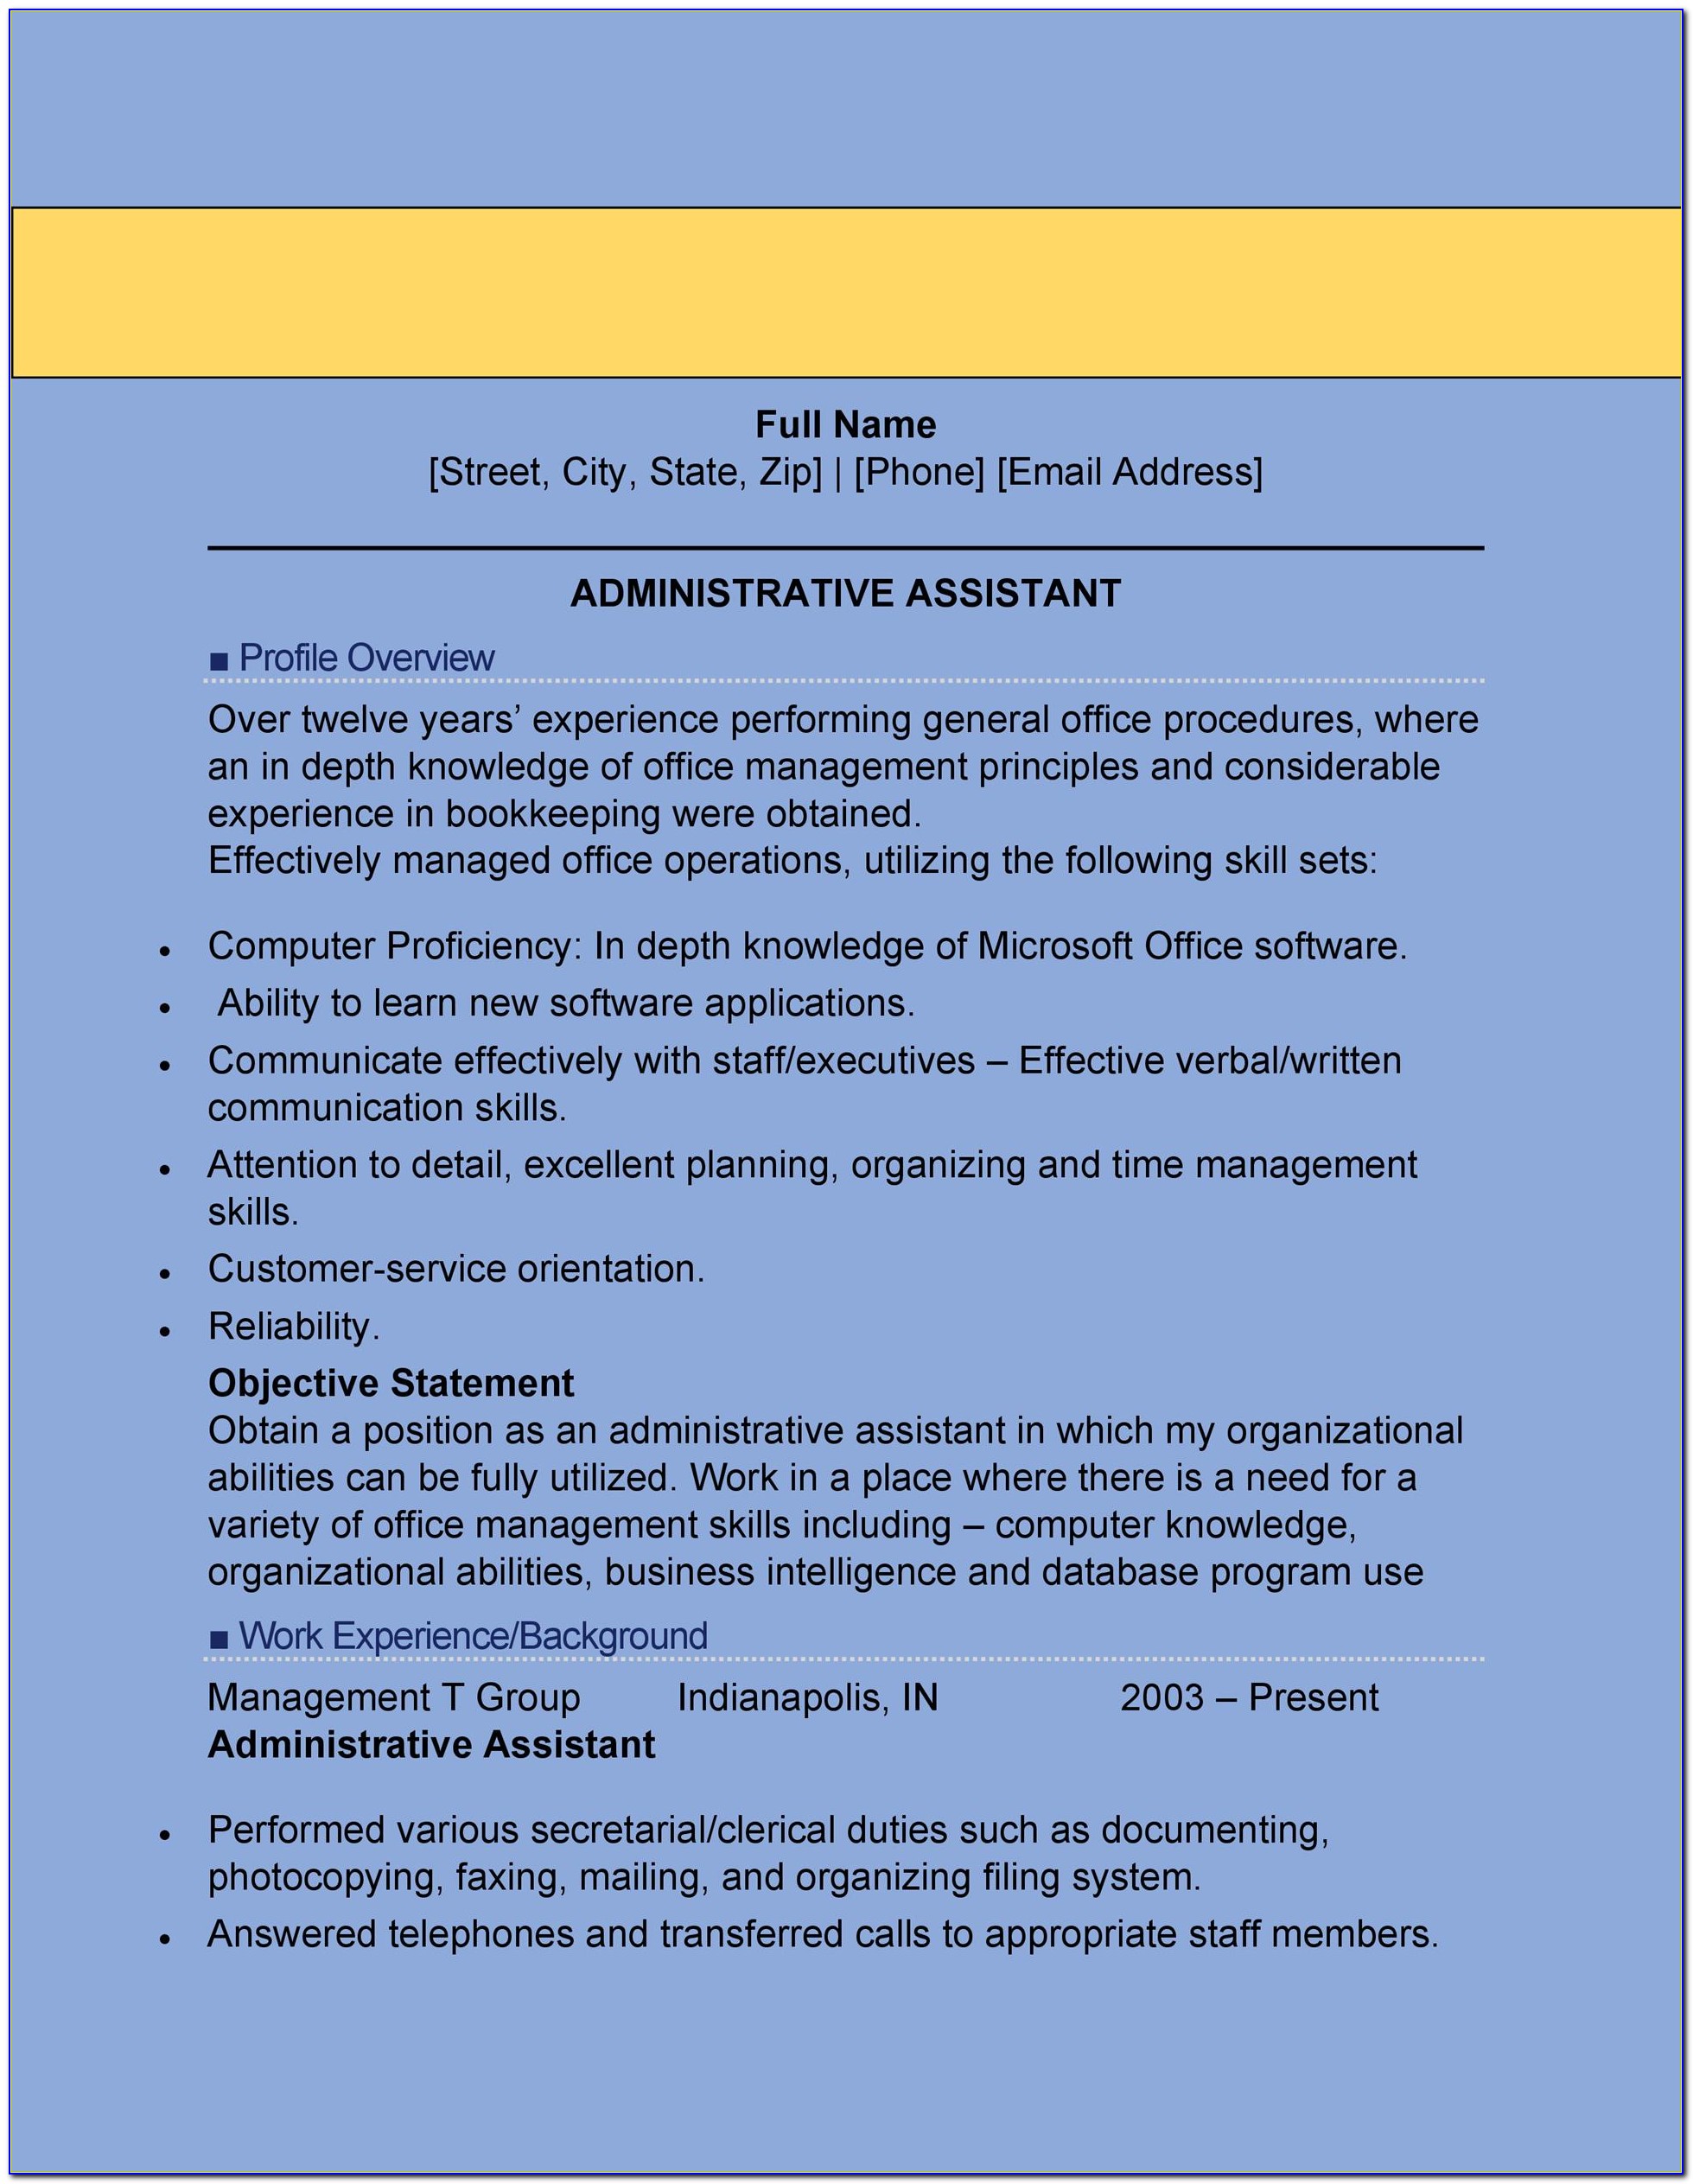 Free Administrative Assistant Resume Examples